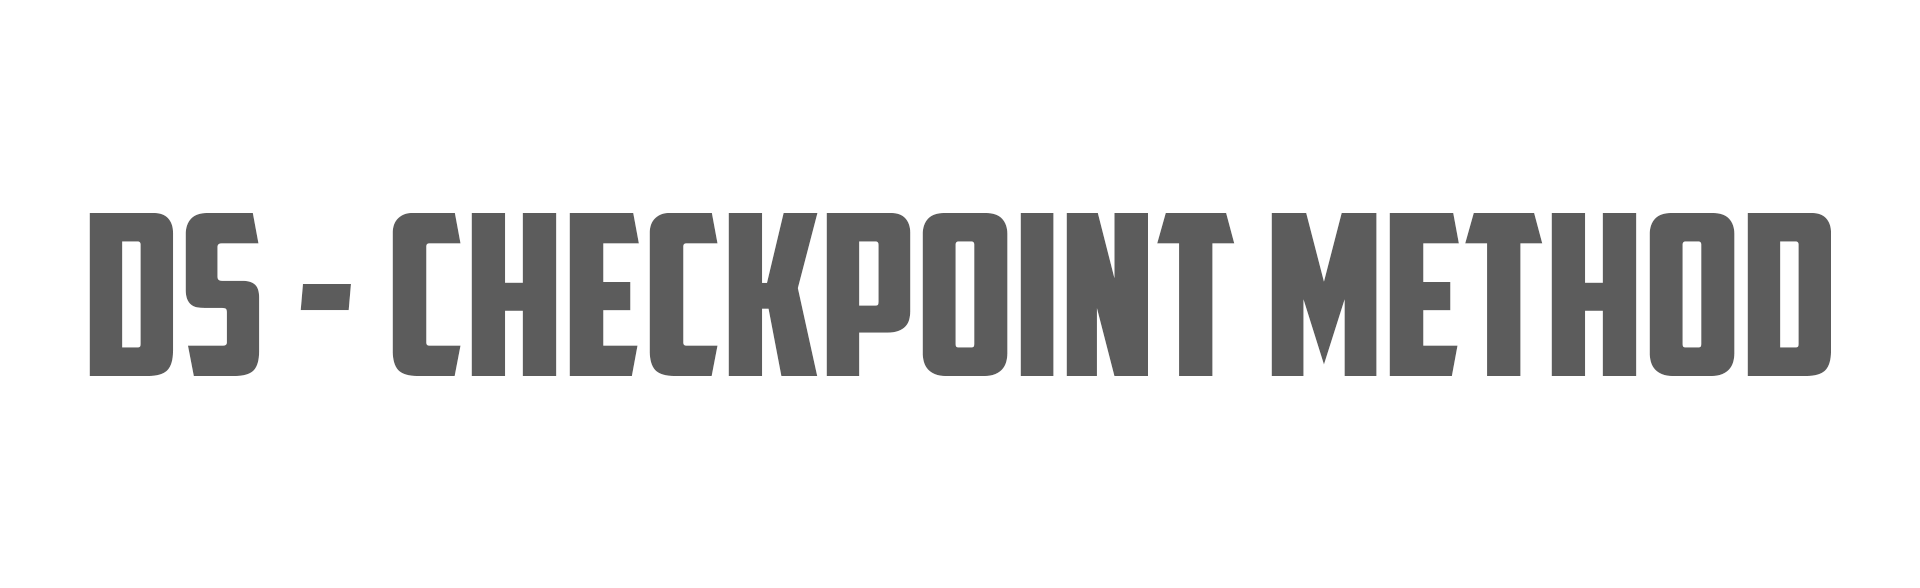 More information about "Using Checkpoint"